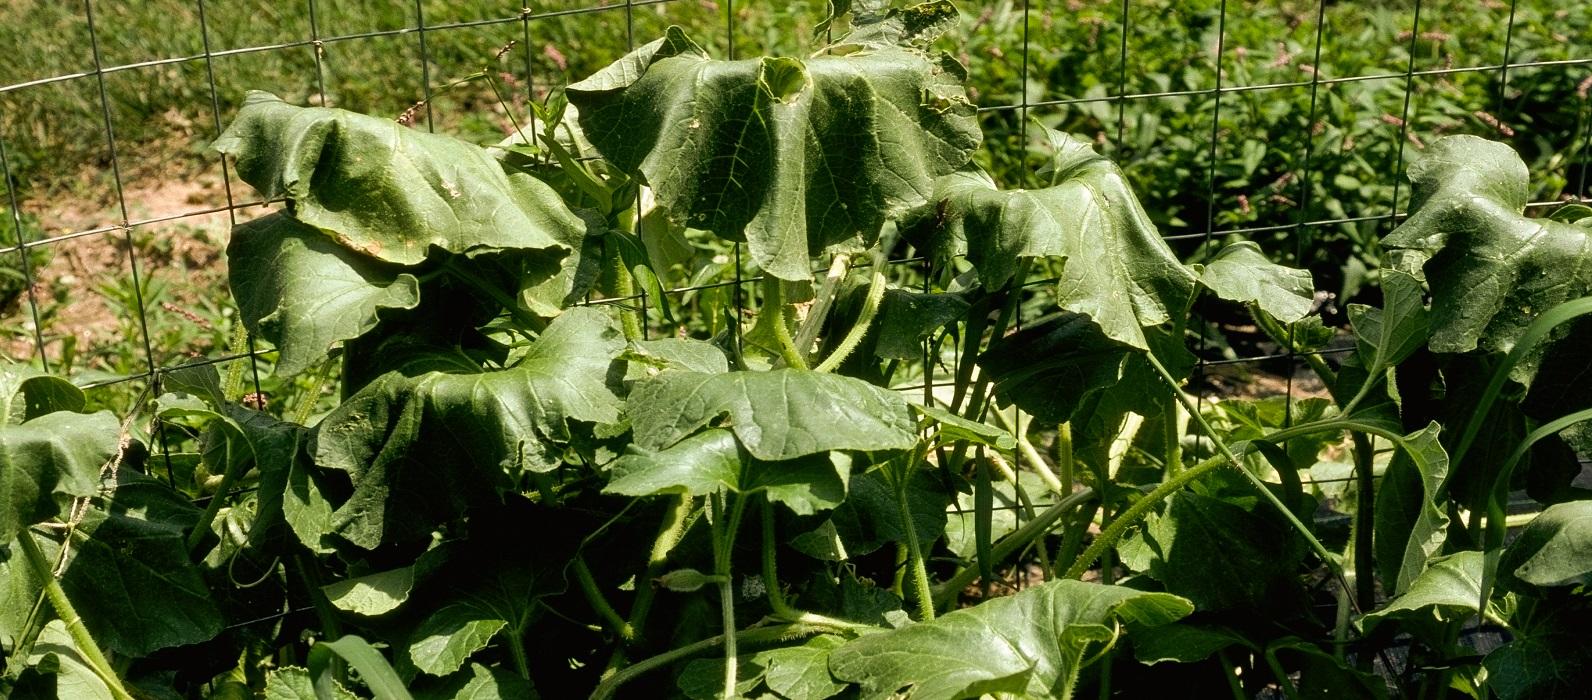 wilting of vegetable plants | university of maryland extension